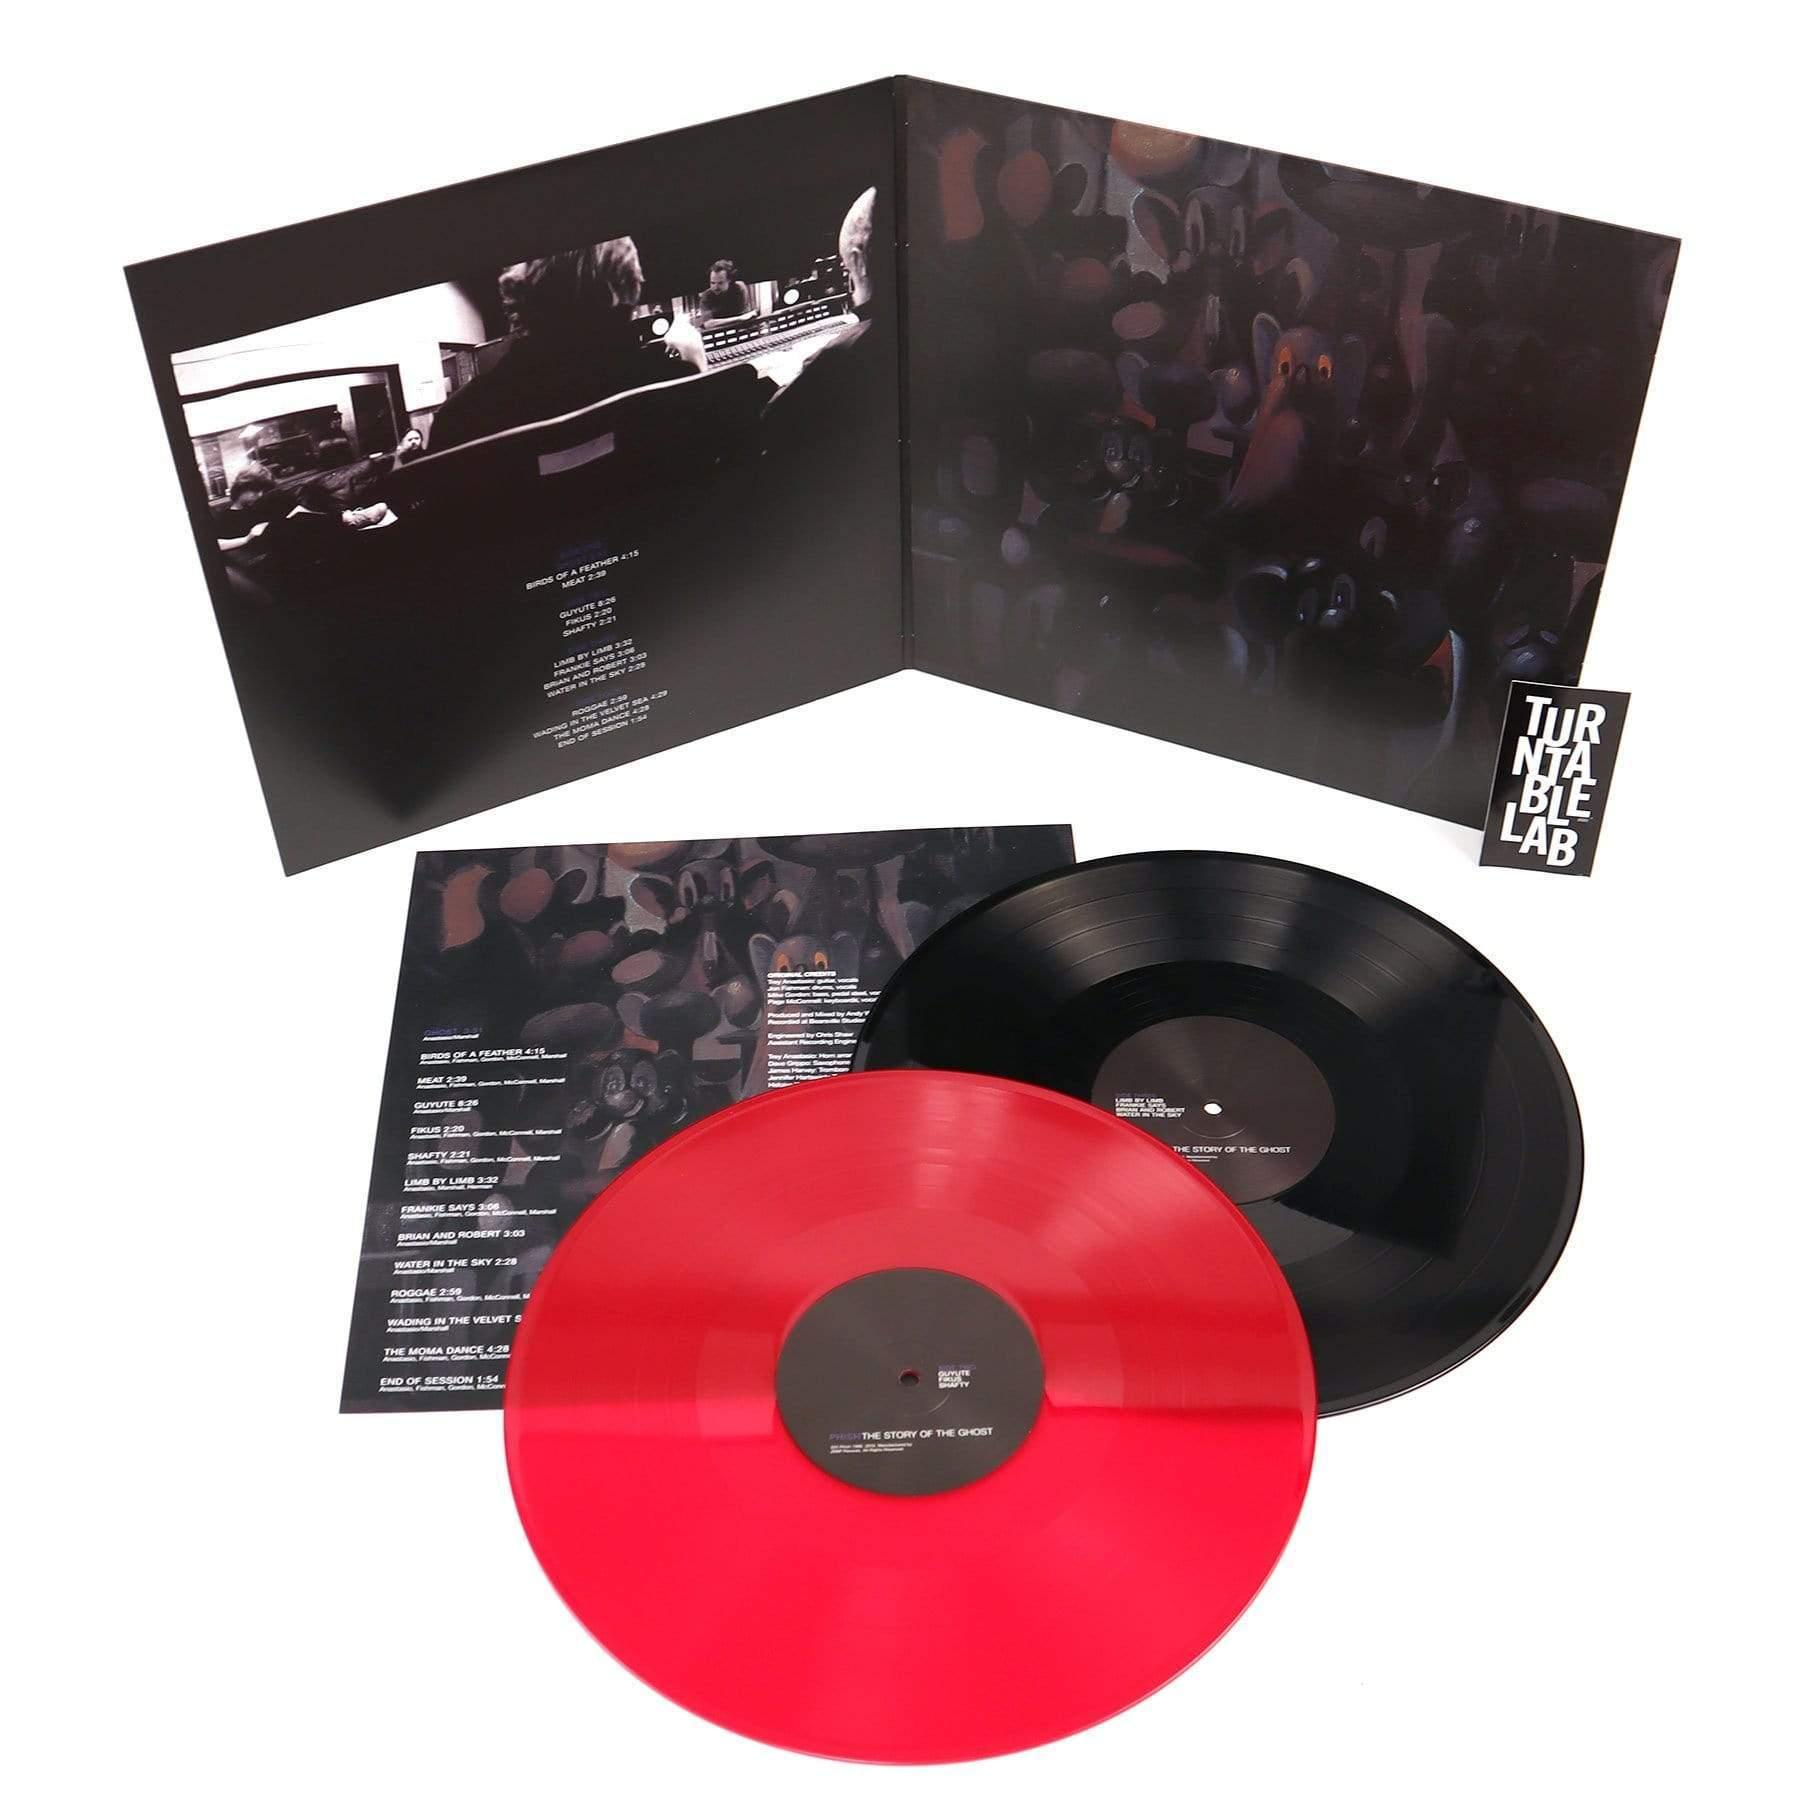 Phish - The Story Of The Ghost (Limited Edition, Red & Black Color) (2 LP) - Joco Records